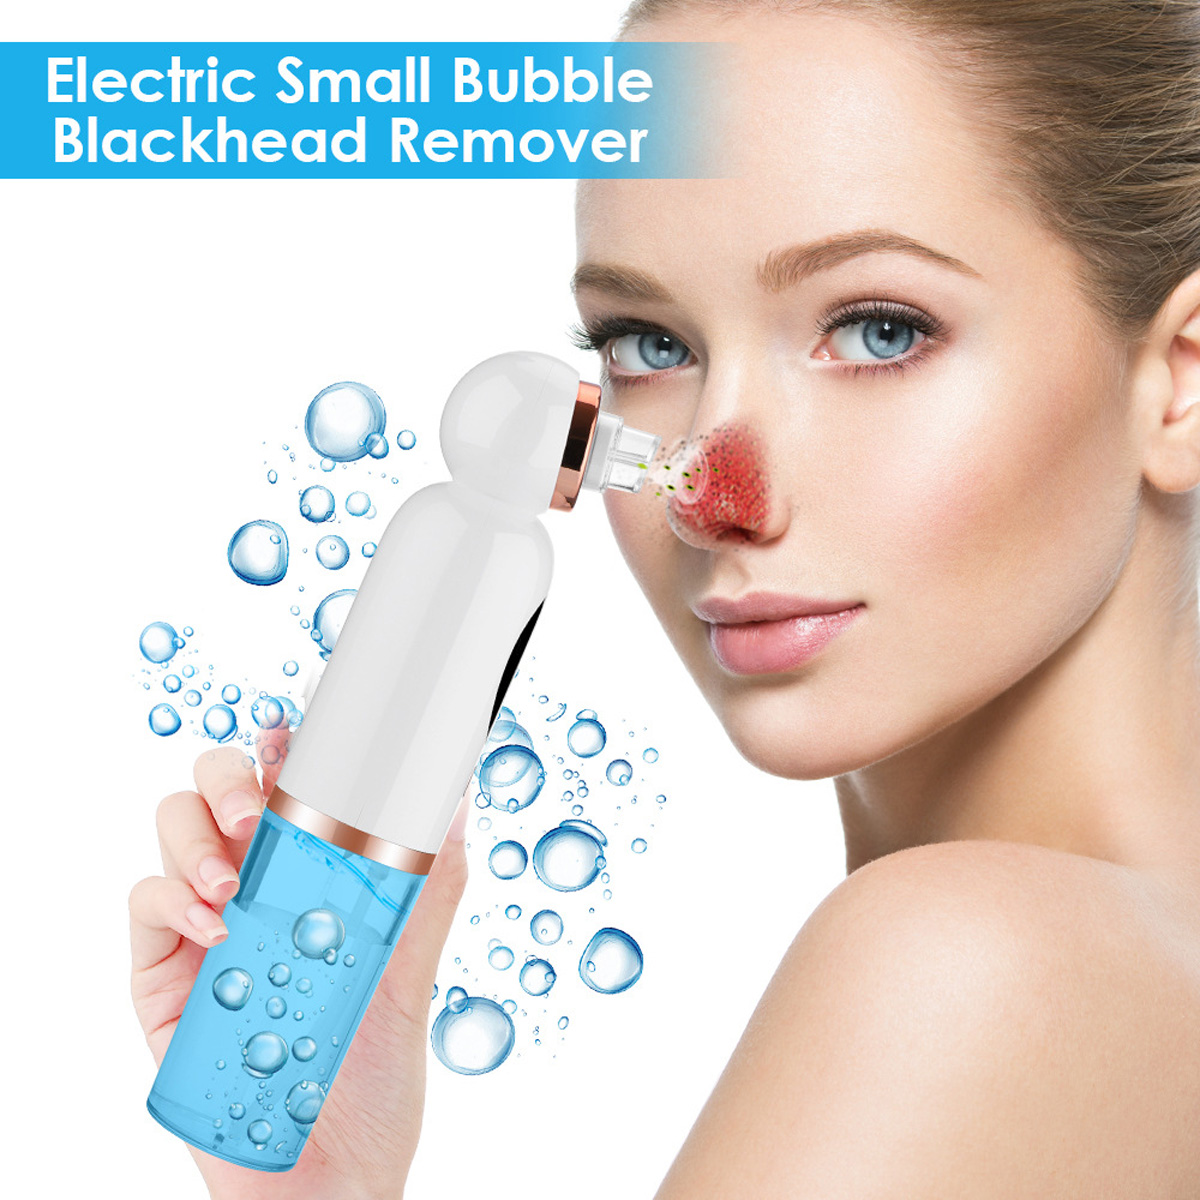 Electric-Small-Bubble-Blackhead-Remover-USB-Rechargeable-Water-Cycle-Pore-Acne-Pimple-Removal-Vacuum-1937725-1